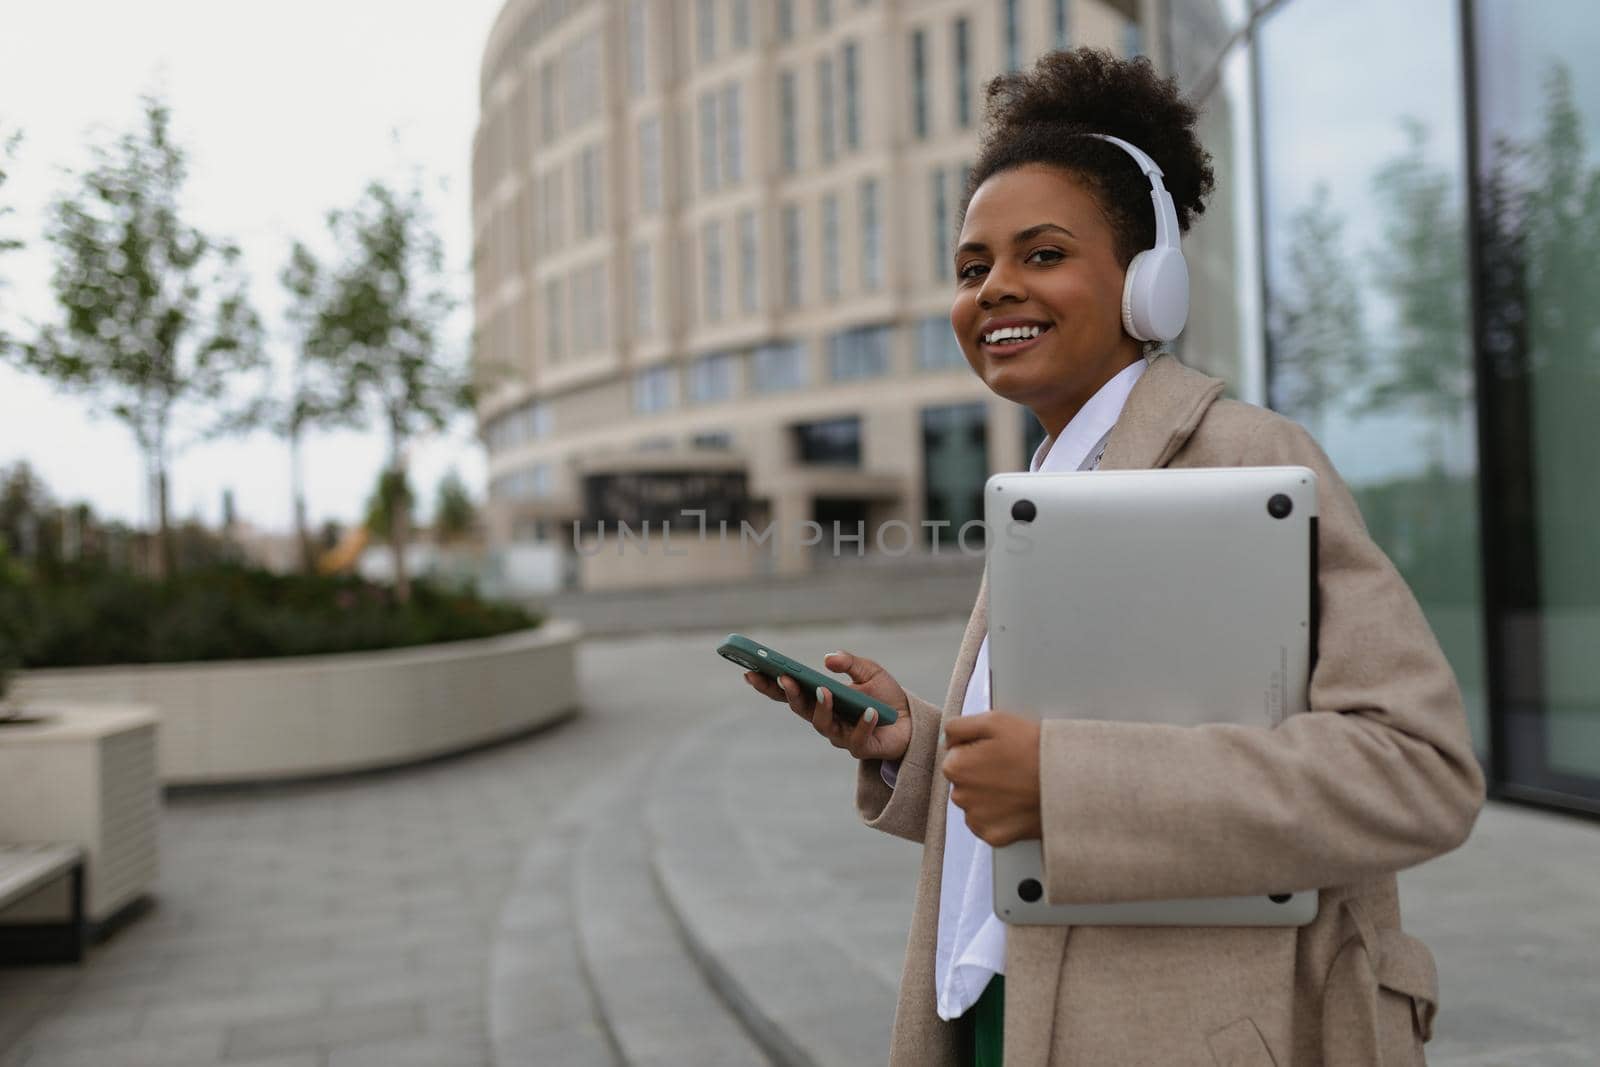 a young American woman with a wide smile walks in headphones with a mobile phone and a laptop against the backdrop of a city building.